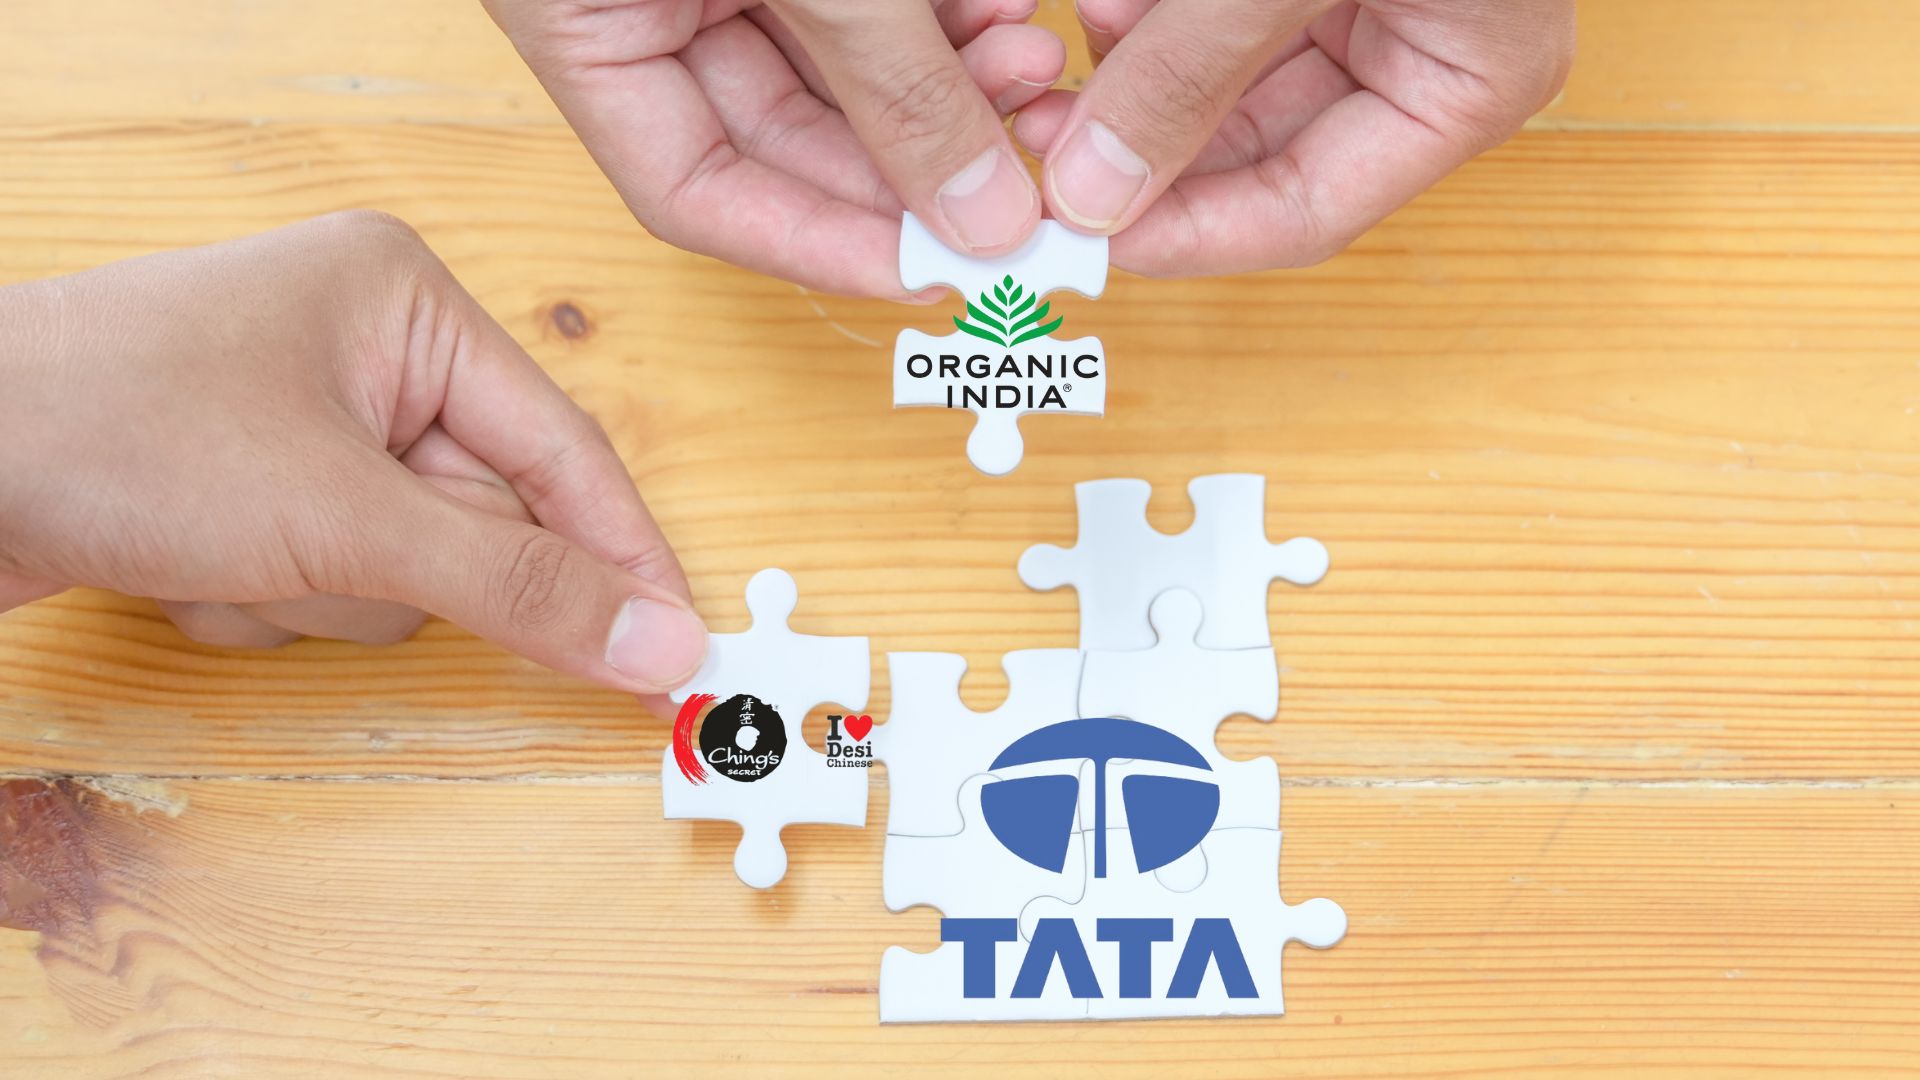 Tata Consumer’s Acquisition Spree: Takes Organic India & Ching's Secret’s Co. Capital Food Under Its Wing